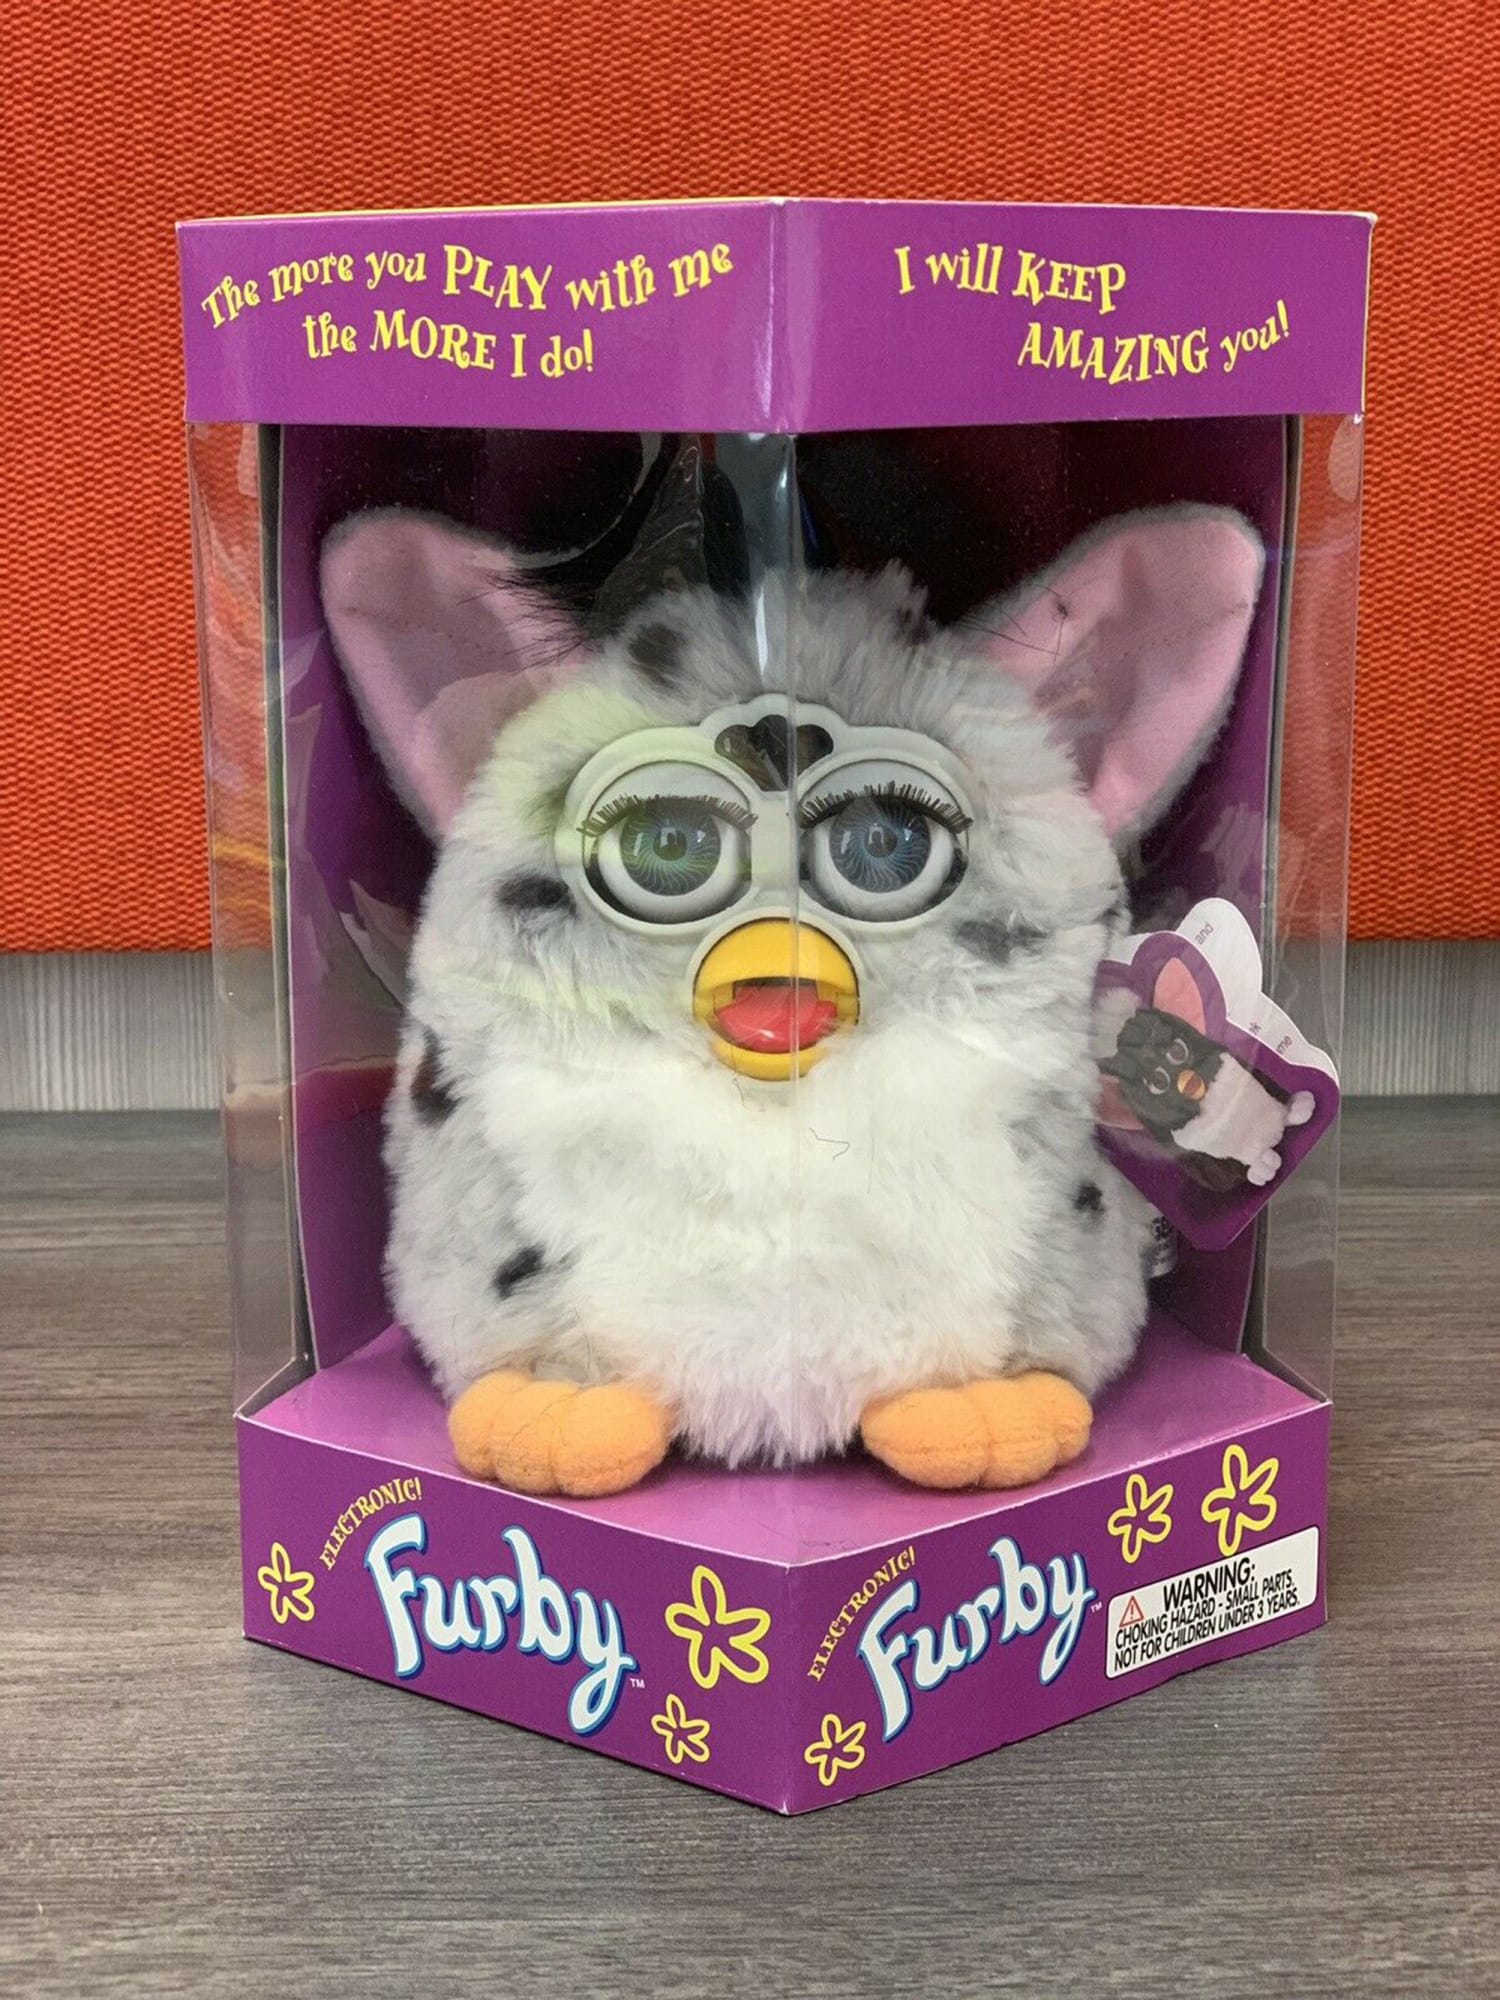 Your Furby from the '90s might actually be worth big bucks